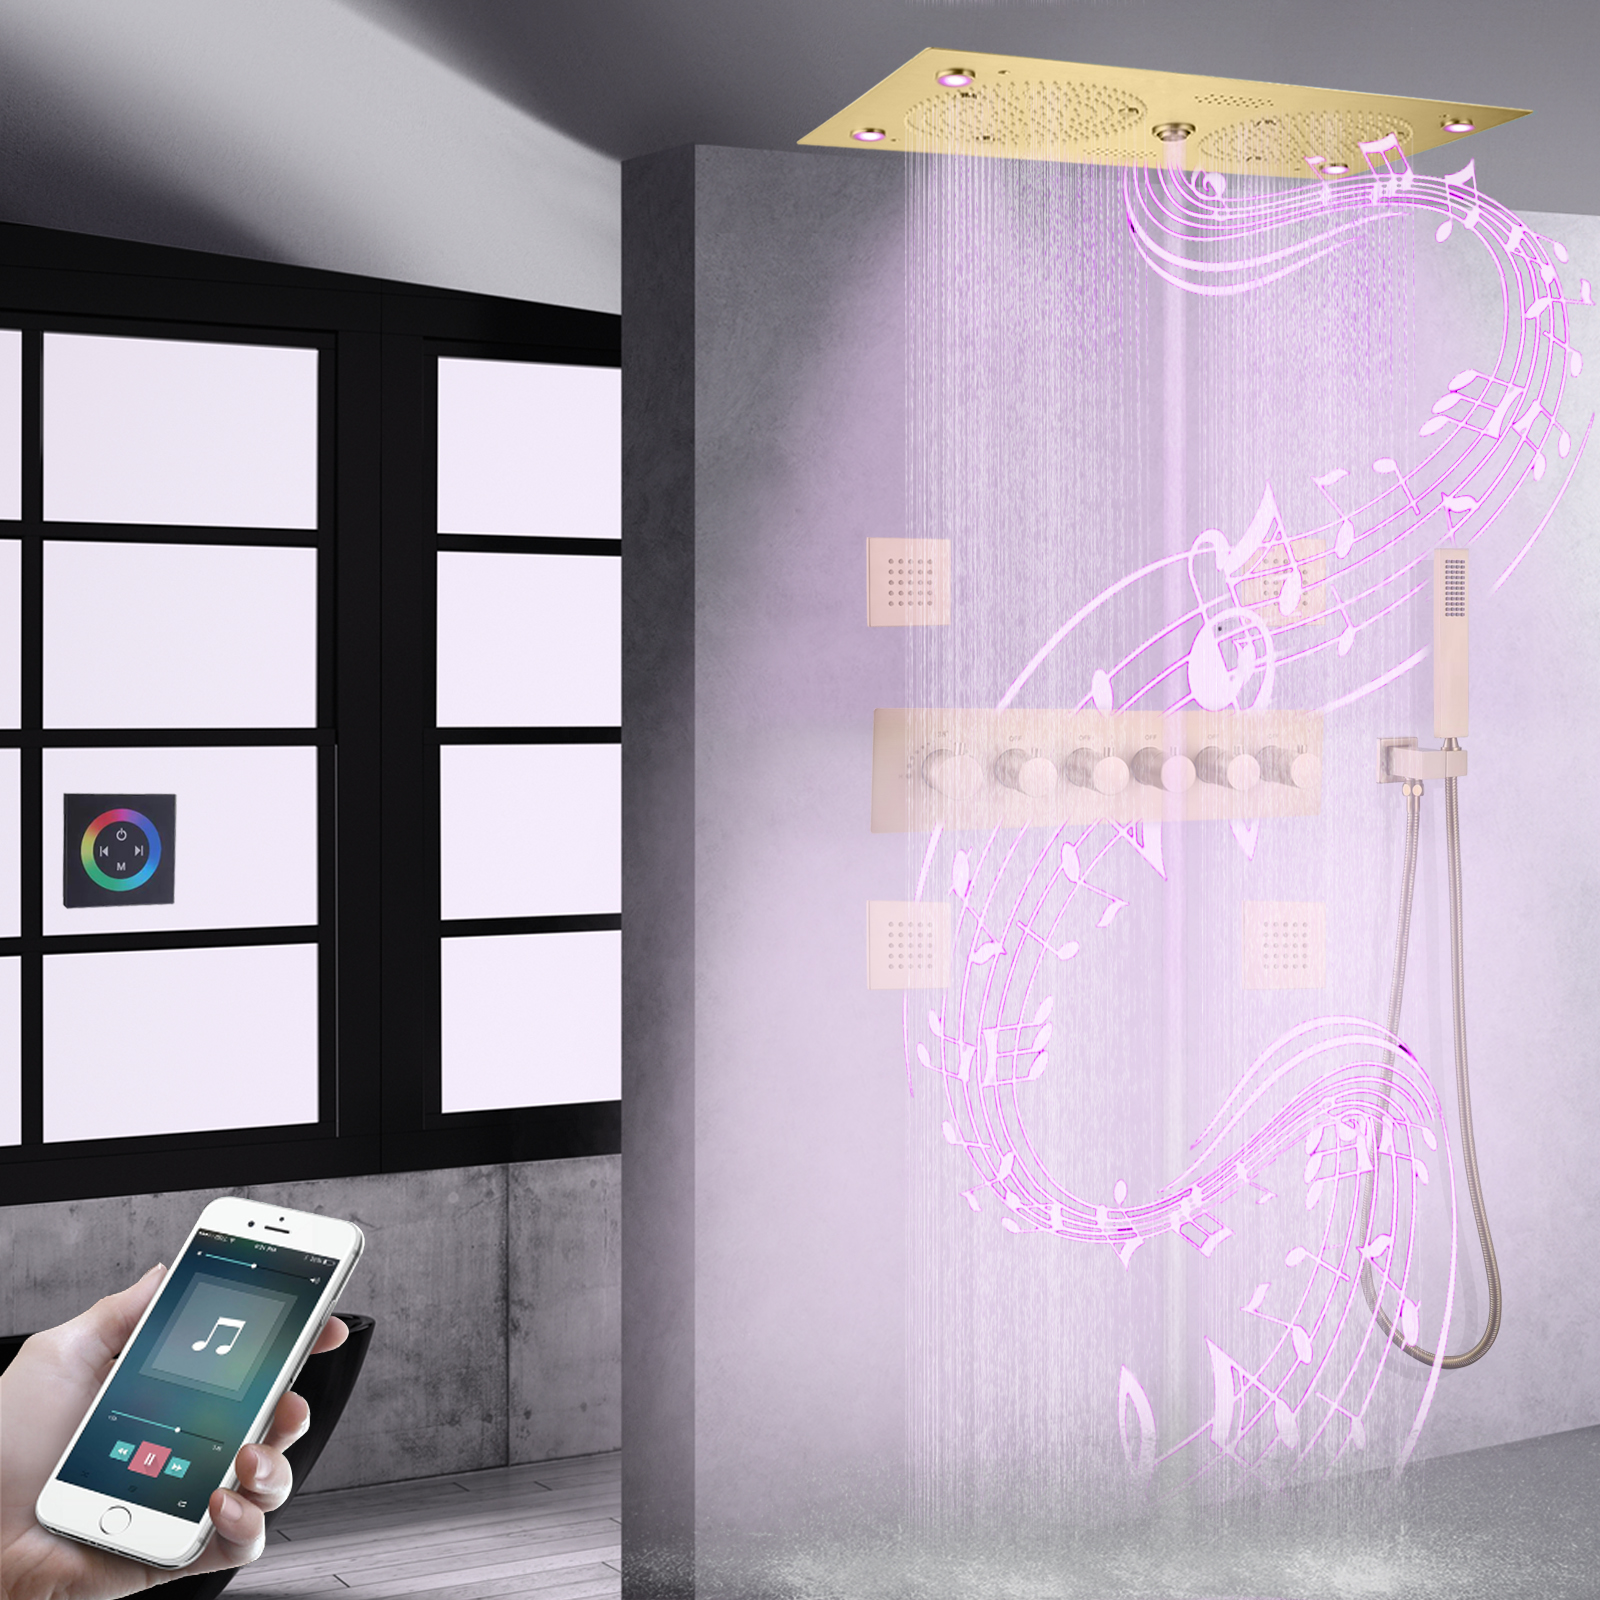 Brushed Gold LED Thermostatic Shower Faucet Rain Mist Column With Music Features Brass Handheld Shower